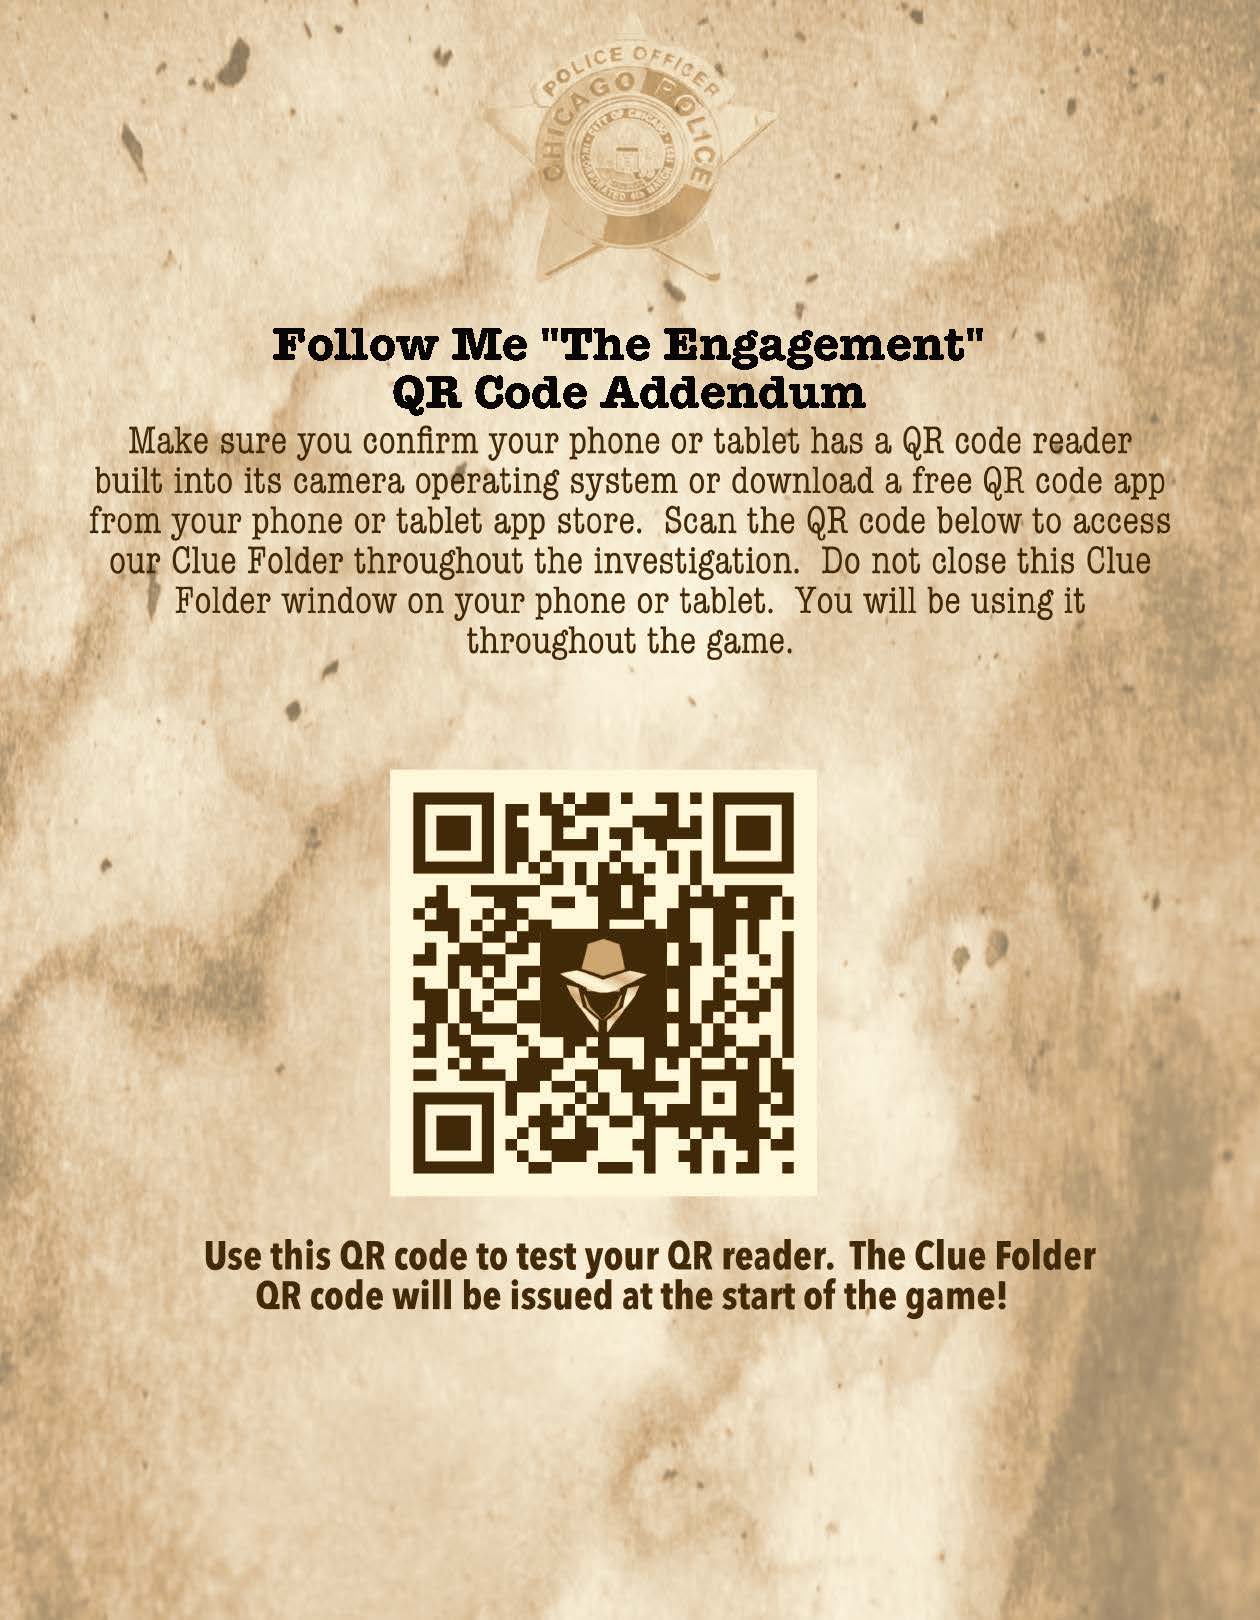 Escape Room QR Code (For a text version of this document or other assistance, please email crfluker@hfcc.edu)